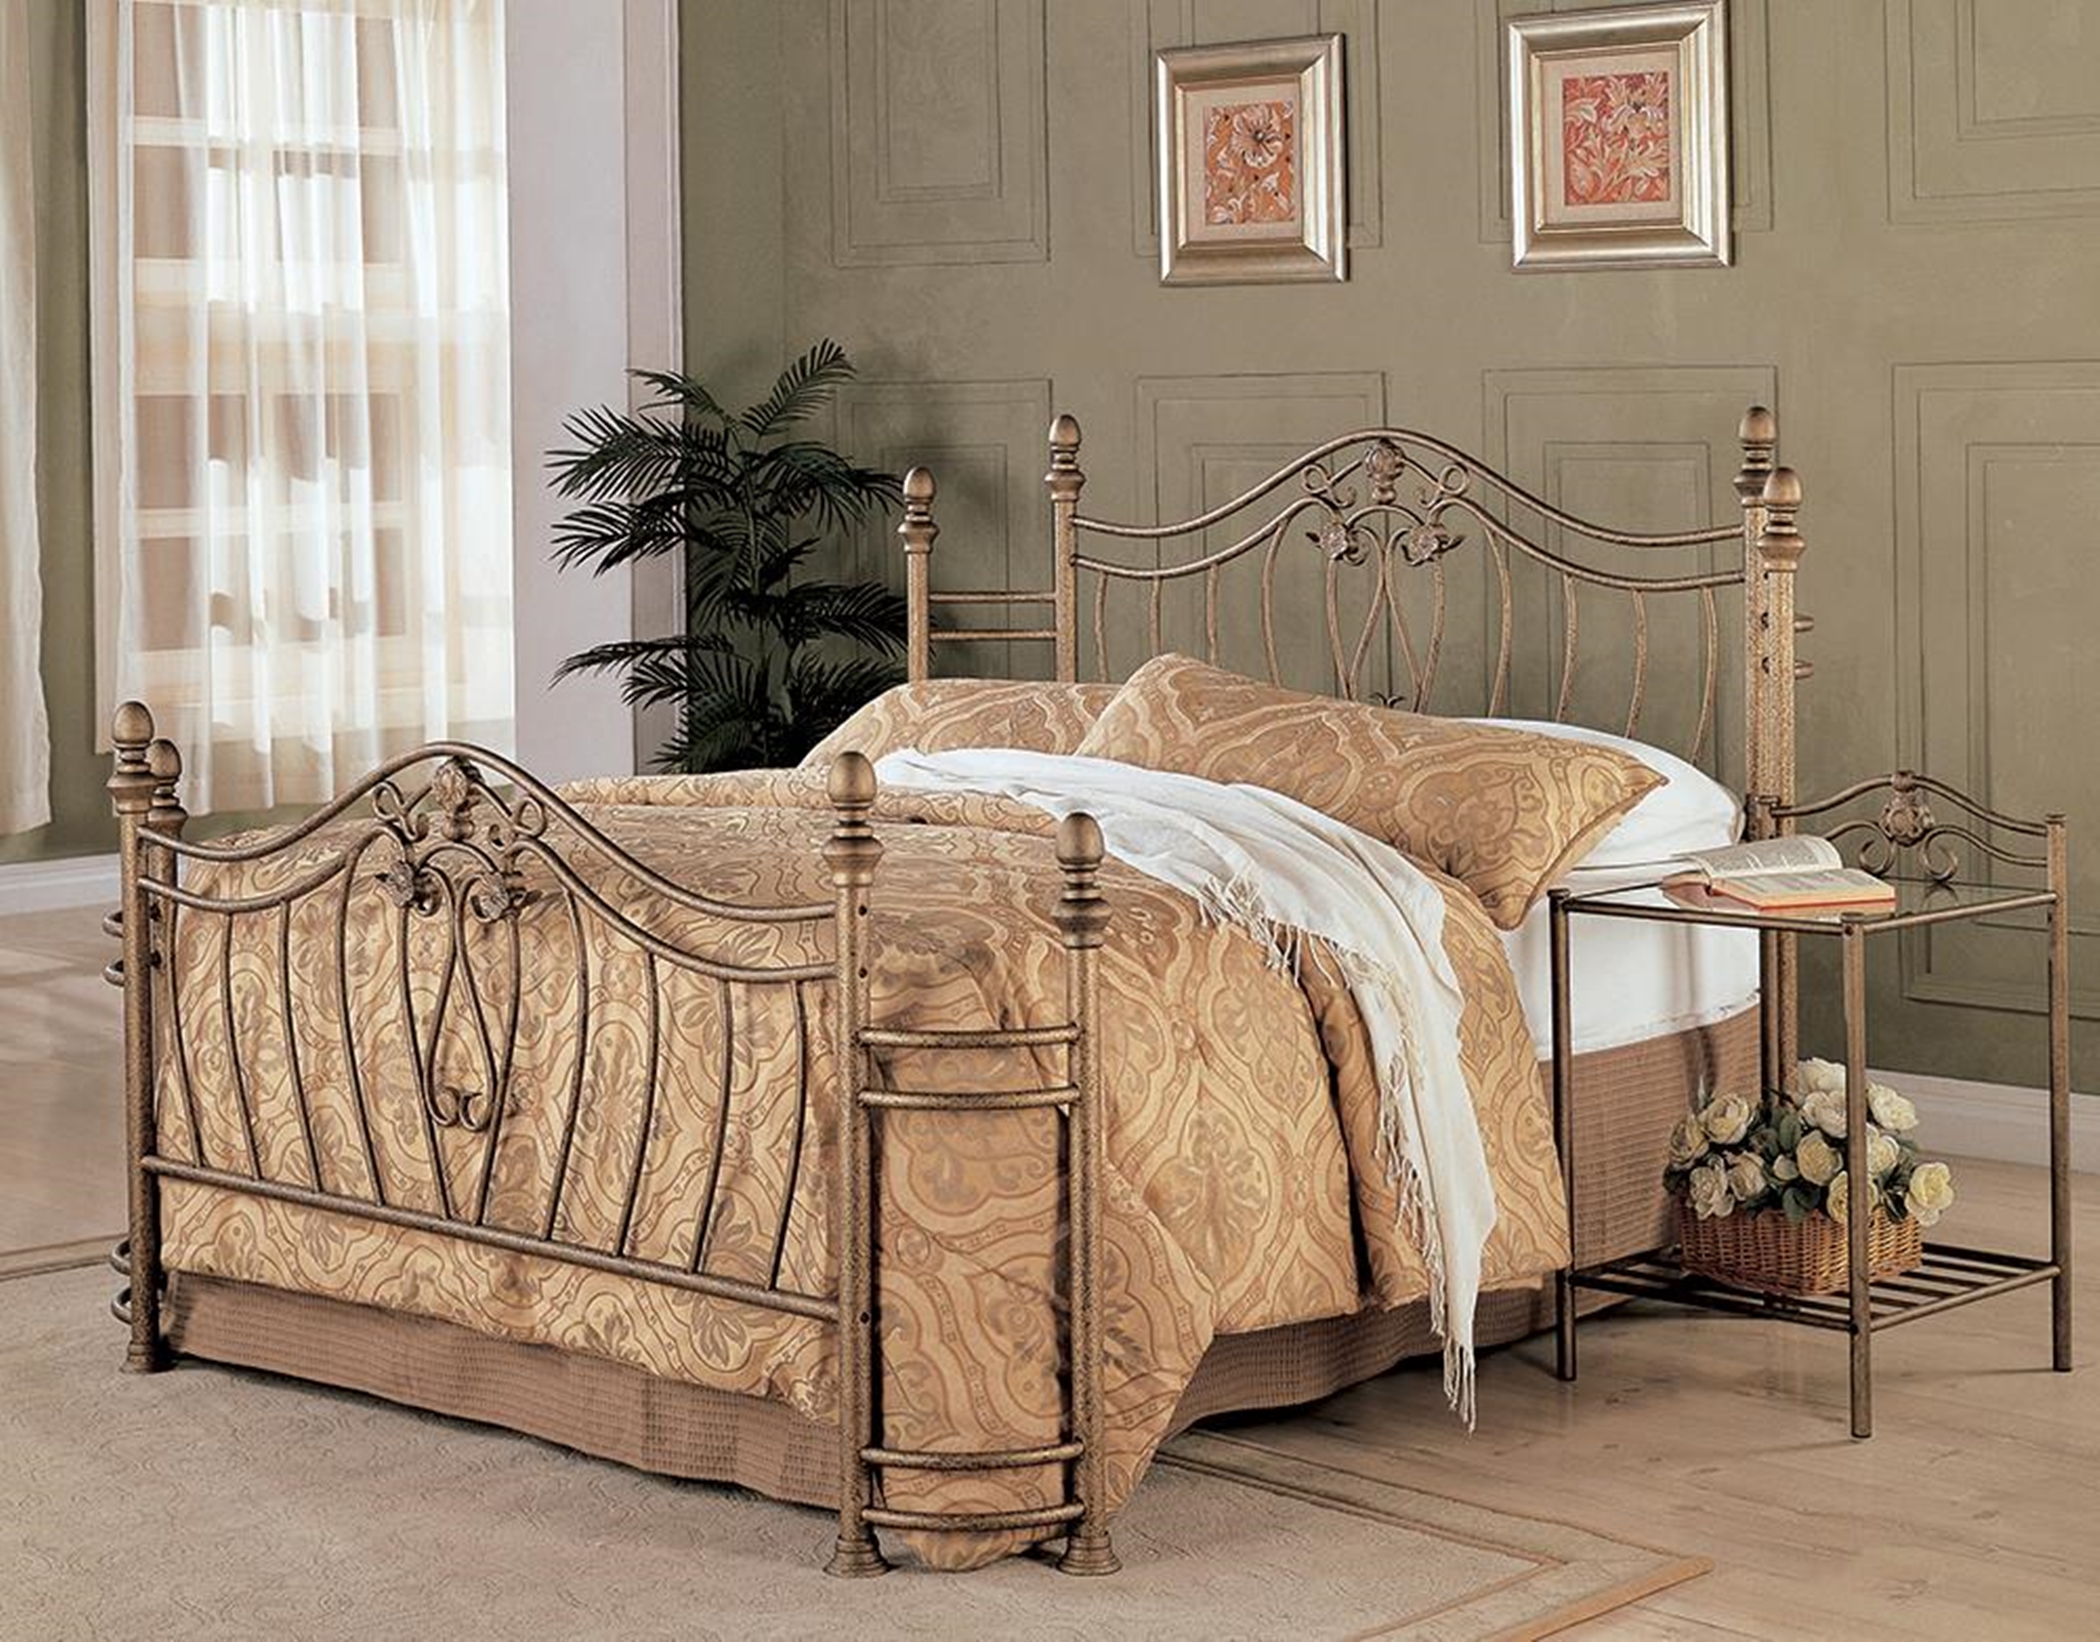 Sydney Antique Brushed E. King Bed - Click Image to Close